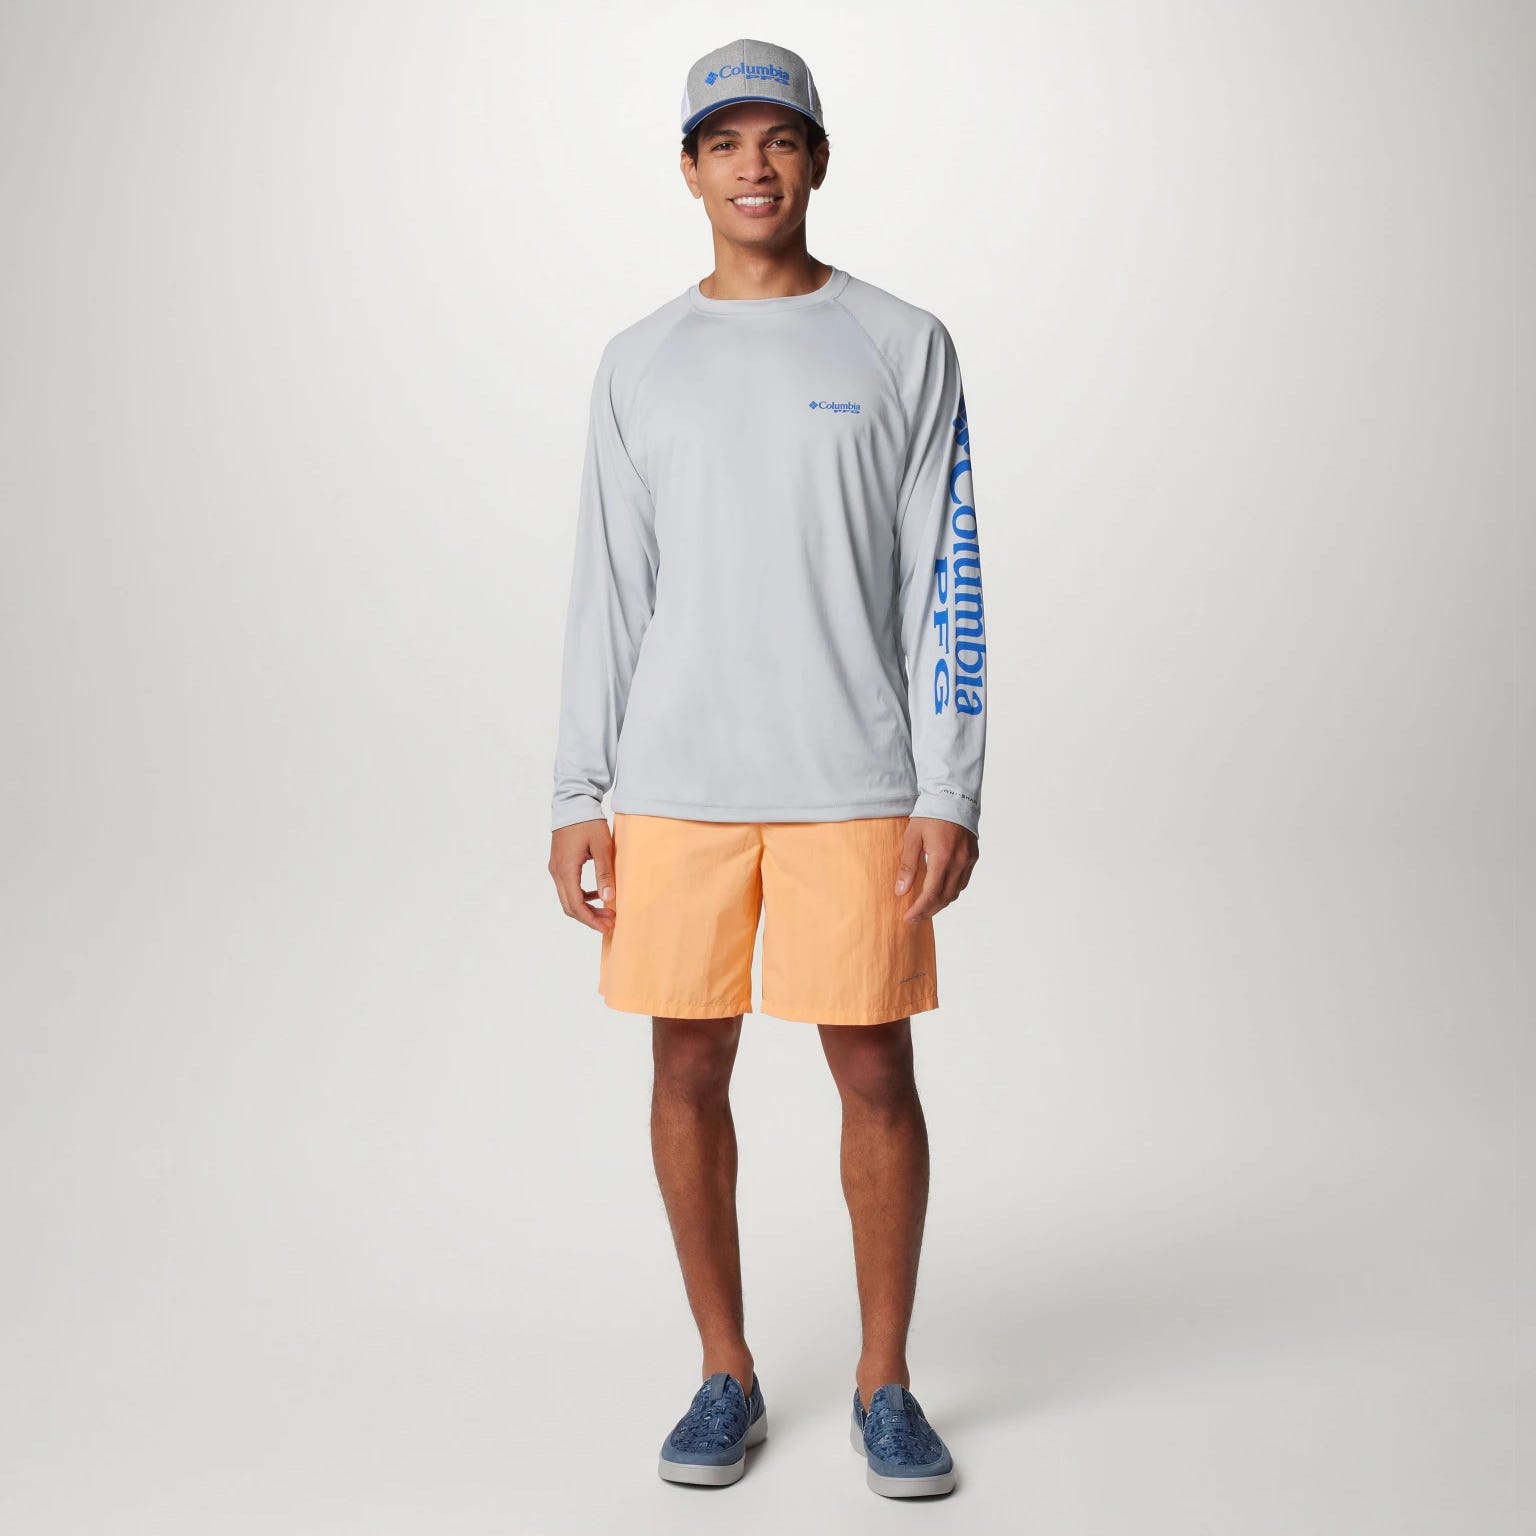 A man models a grey long-sleeve shirt, orange shorts, a white cap, and blue sneakers.